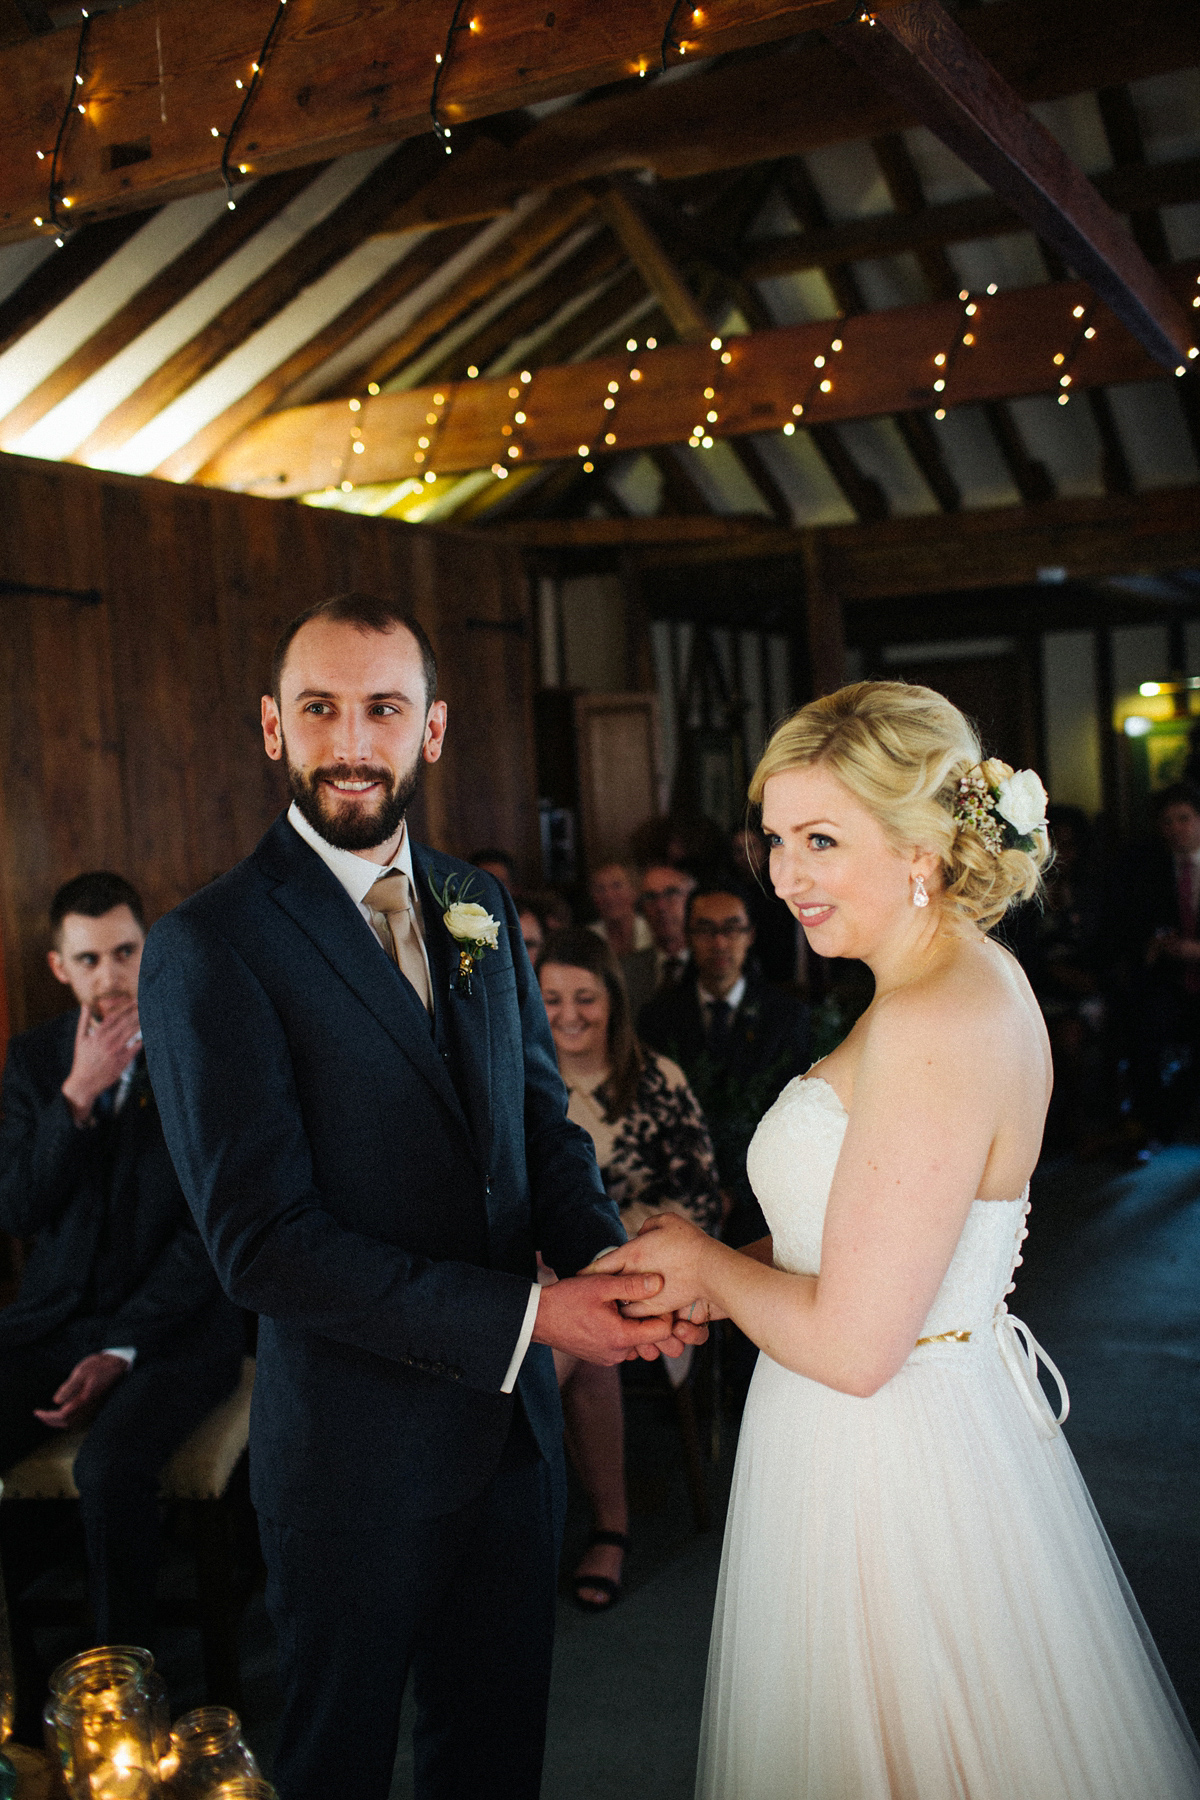 Zena and Tom's woodland glam inspired wedding was held in a beautiful barn in the spring time. Photography by Claudia Rose Carter.